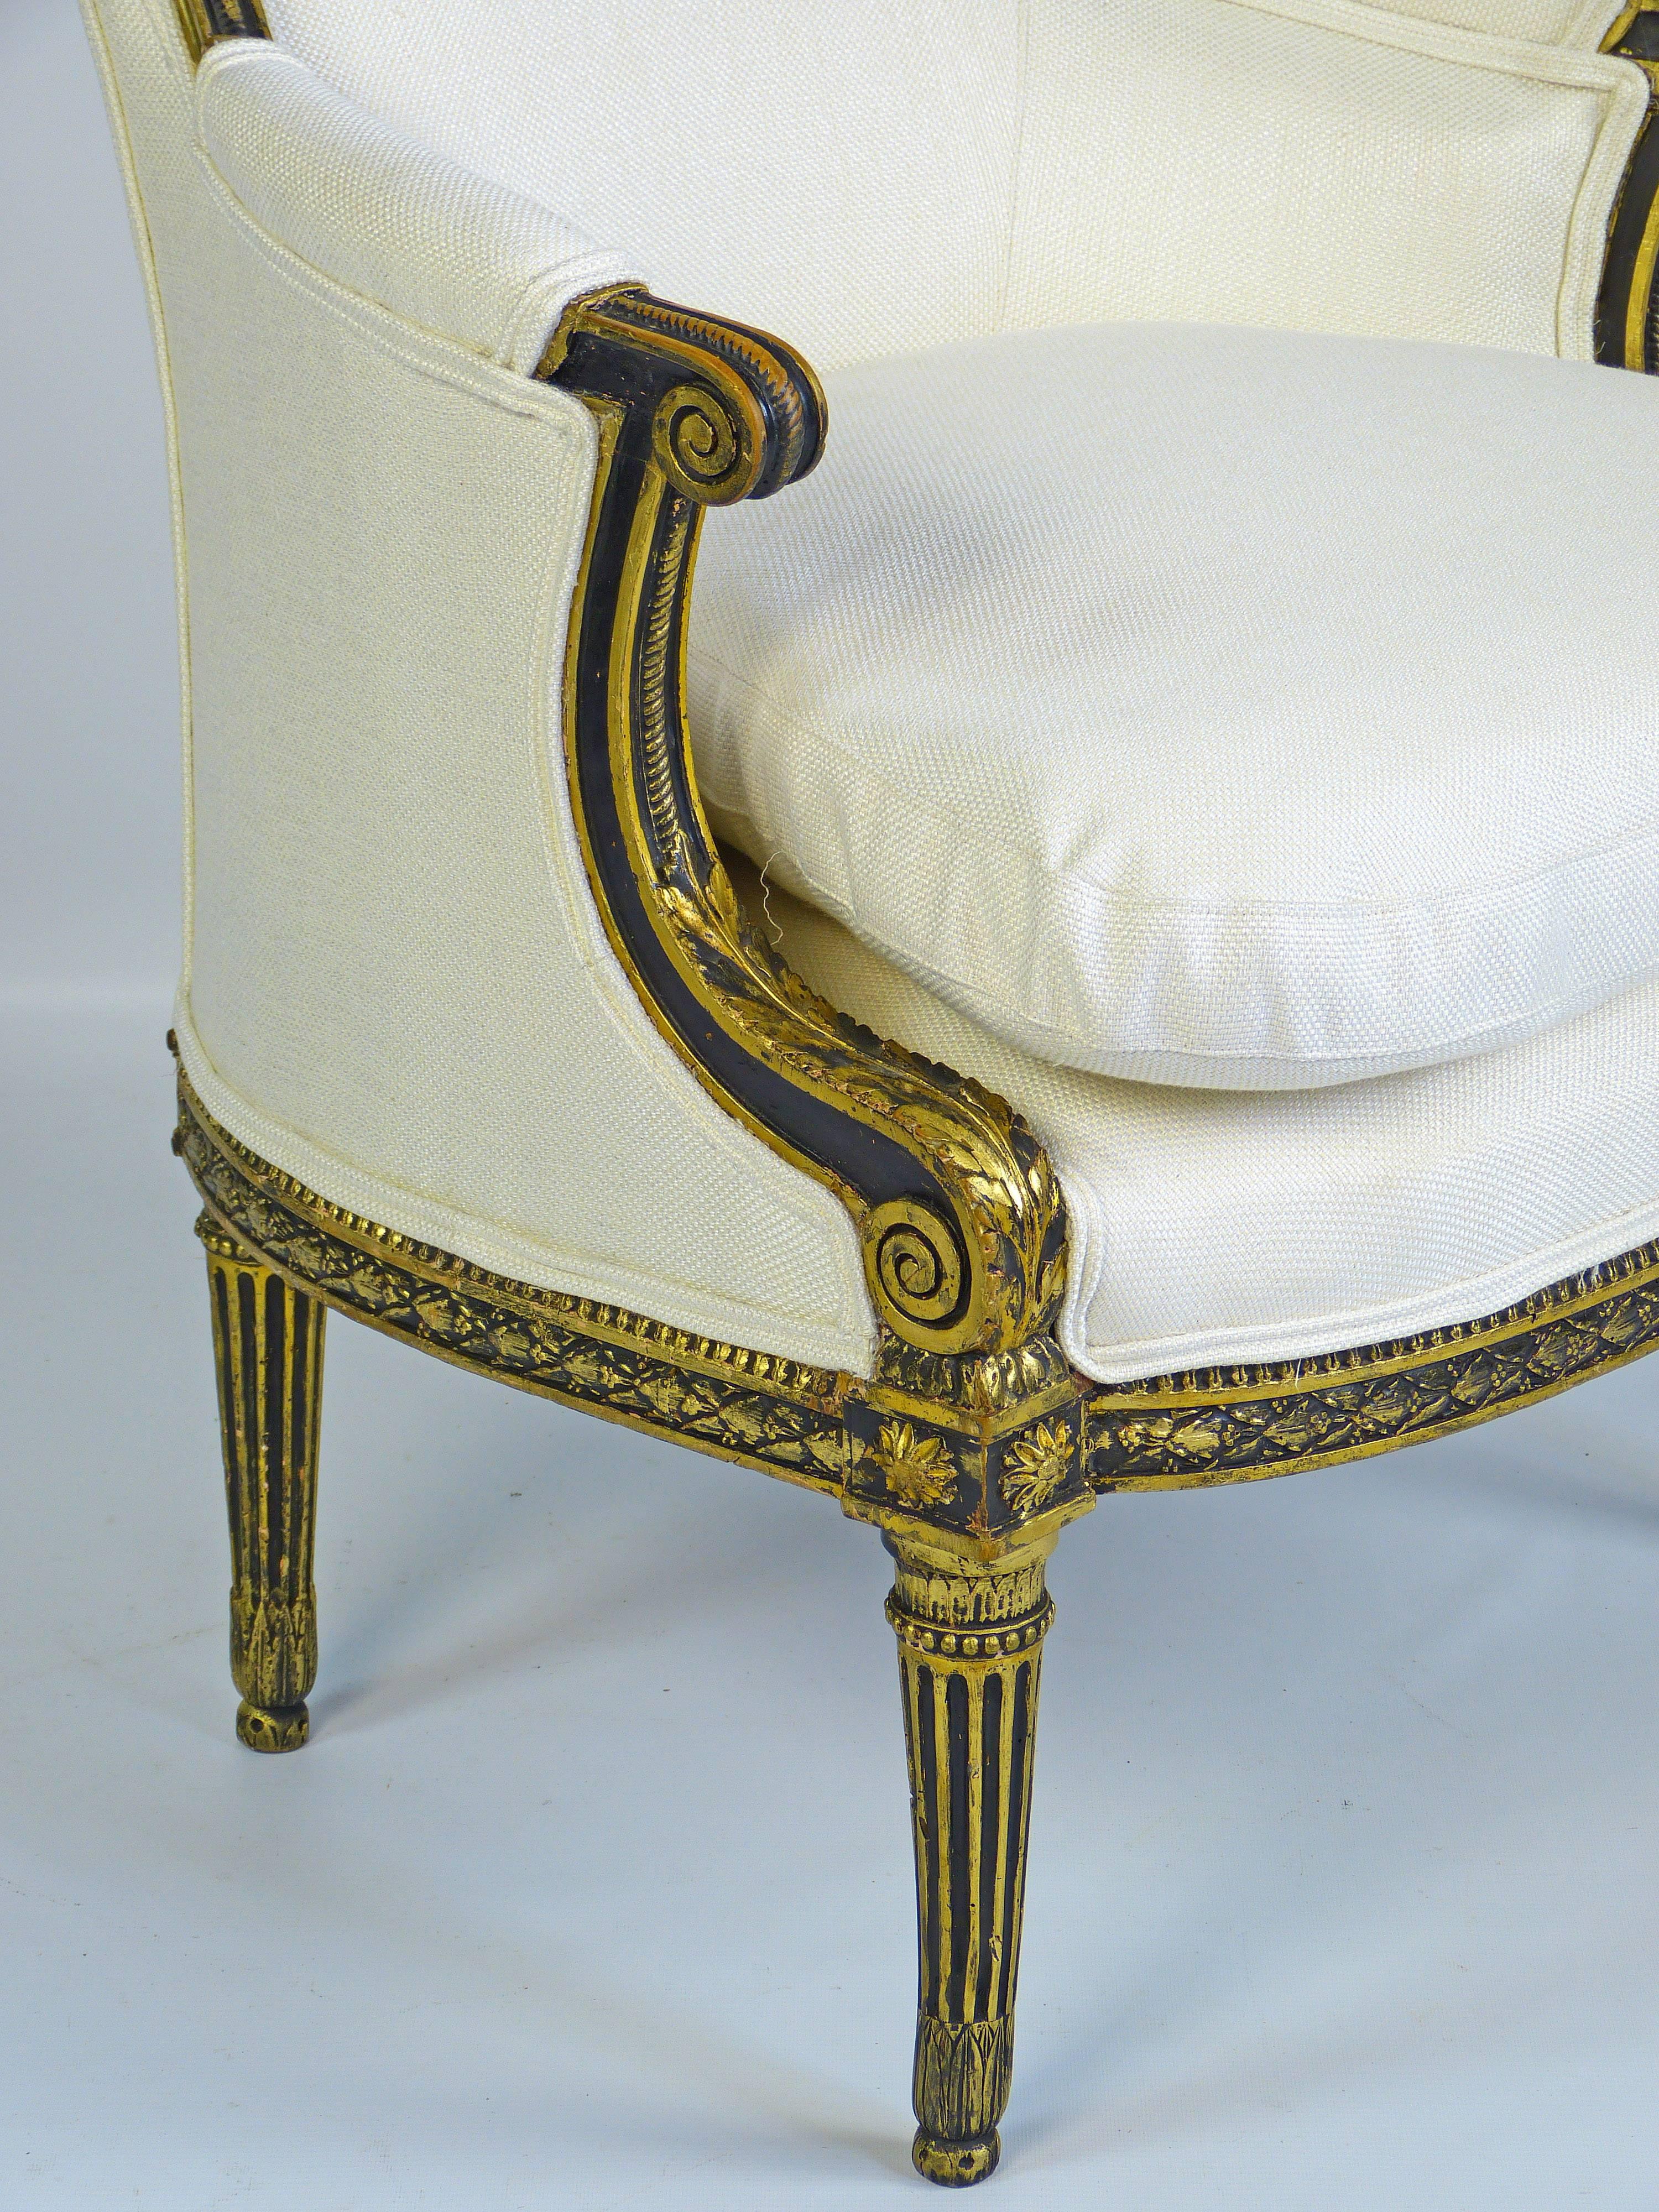 Armchair French Fauteuil 18th Century Louis XVI  by FC Menant 2